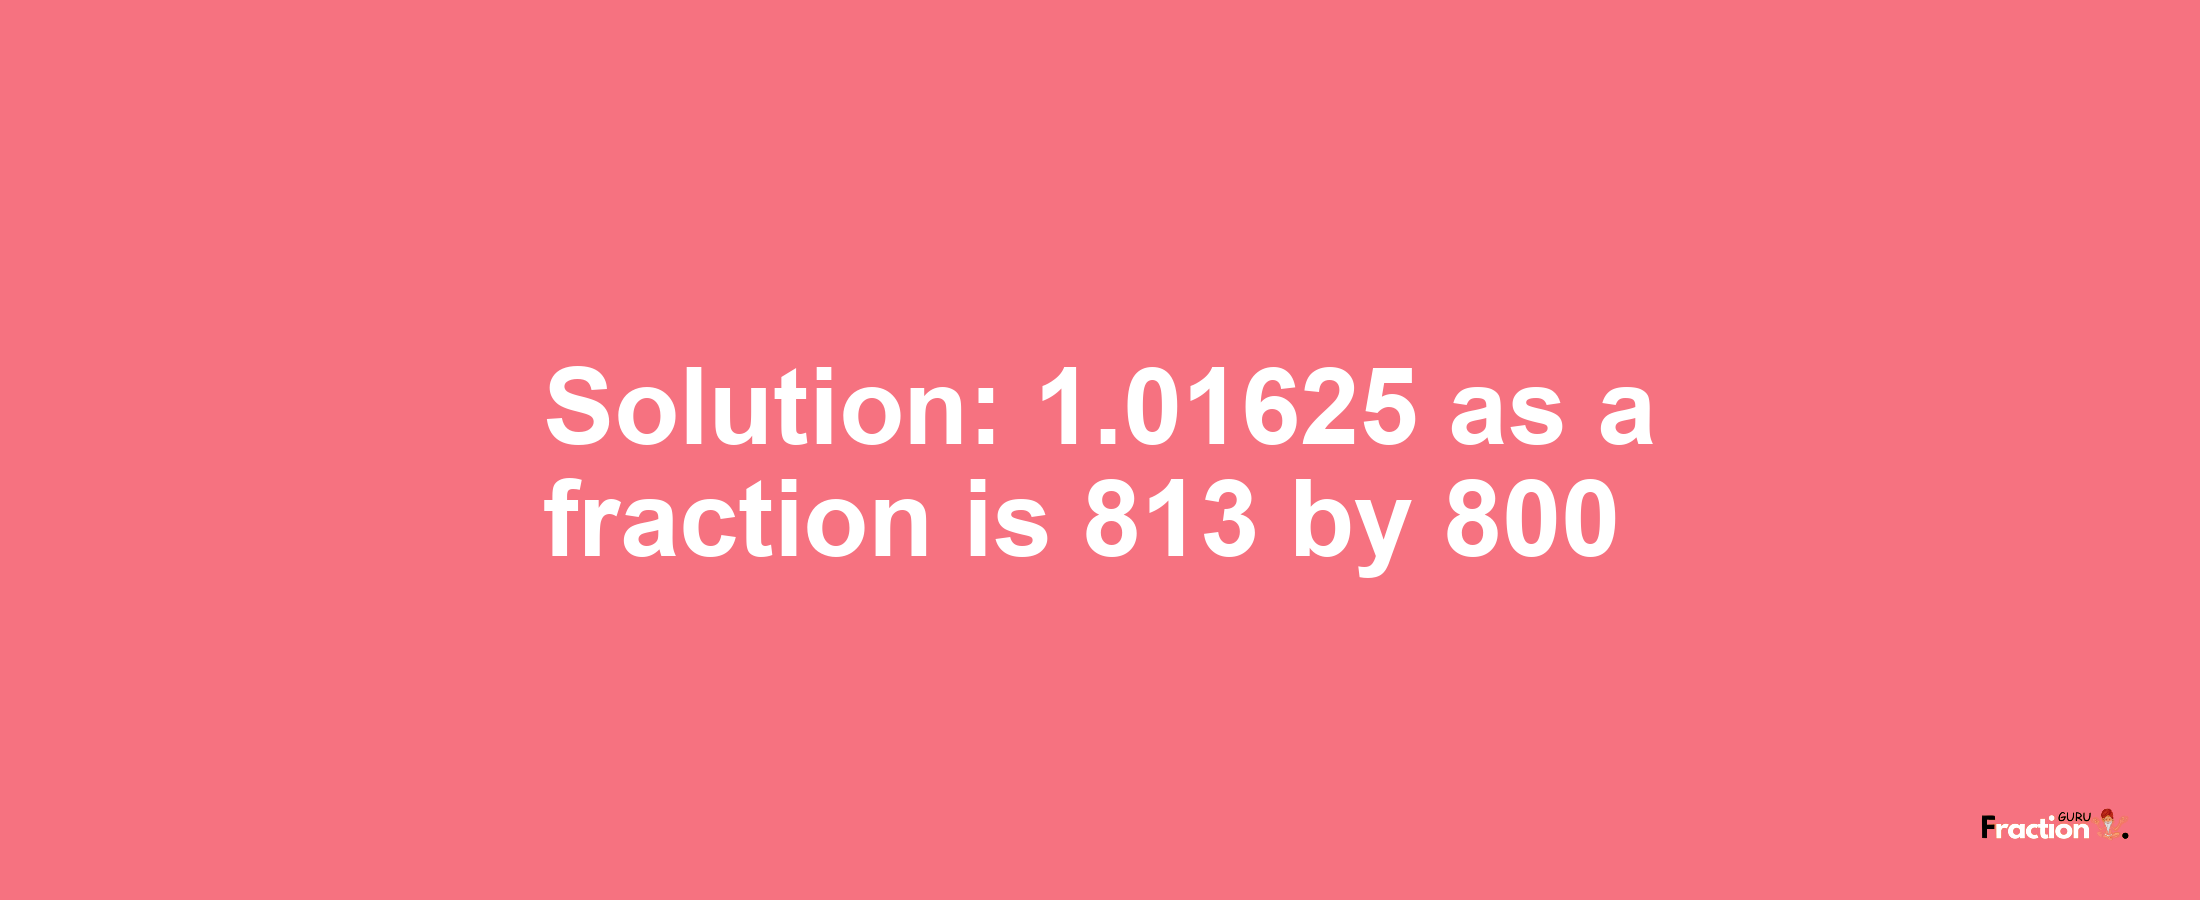 Solution:1.01625 as a fraction is 813/800